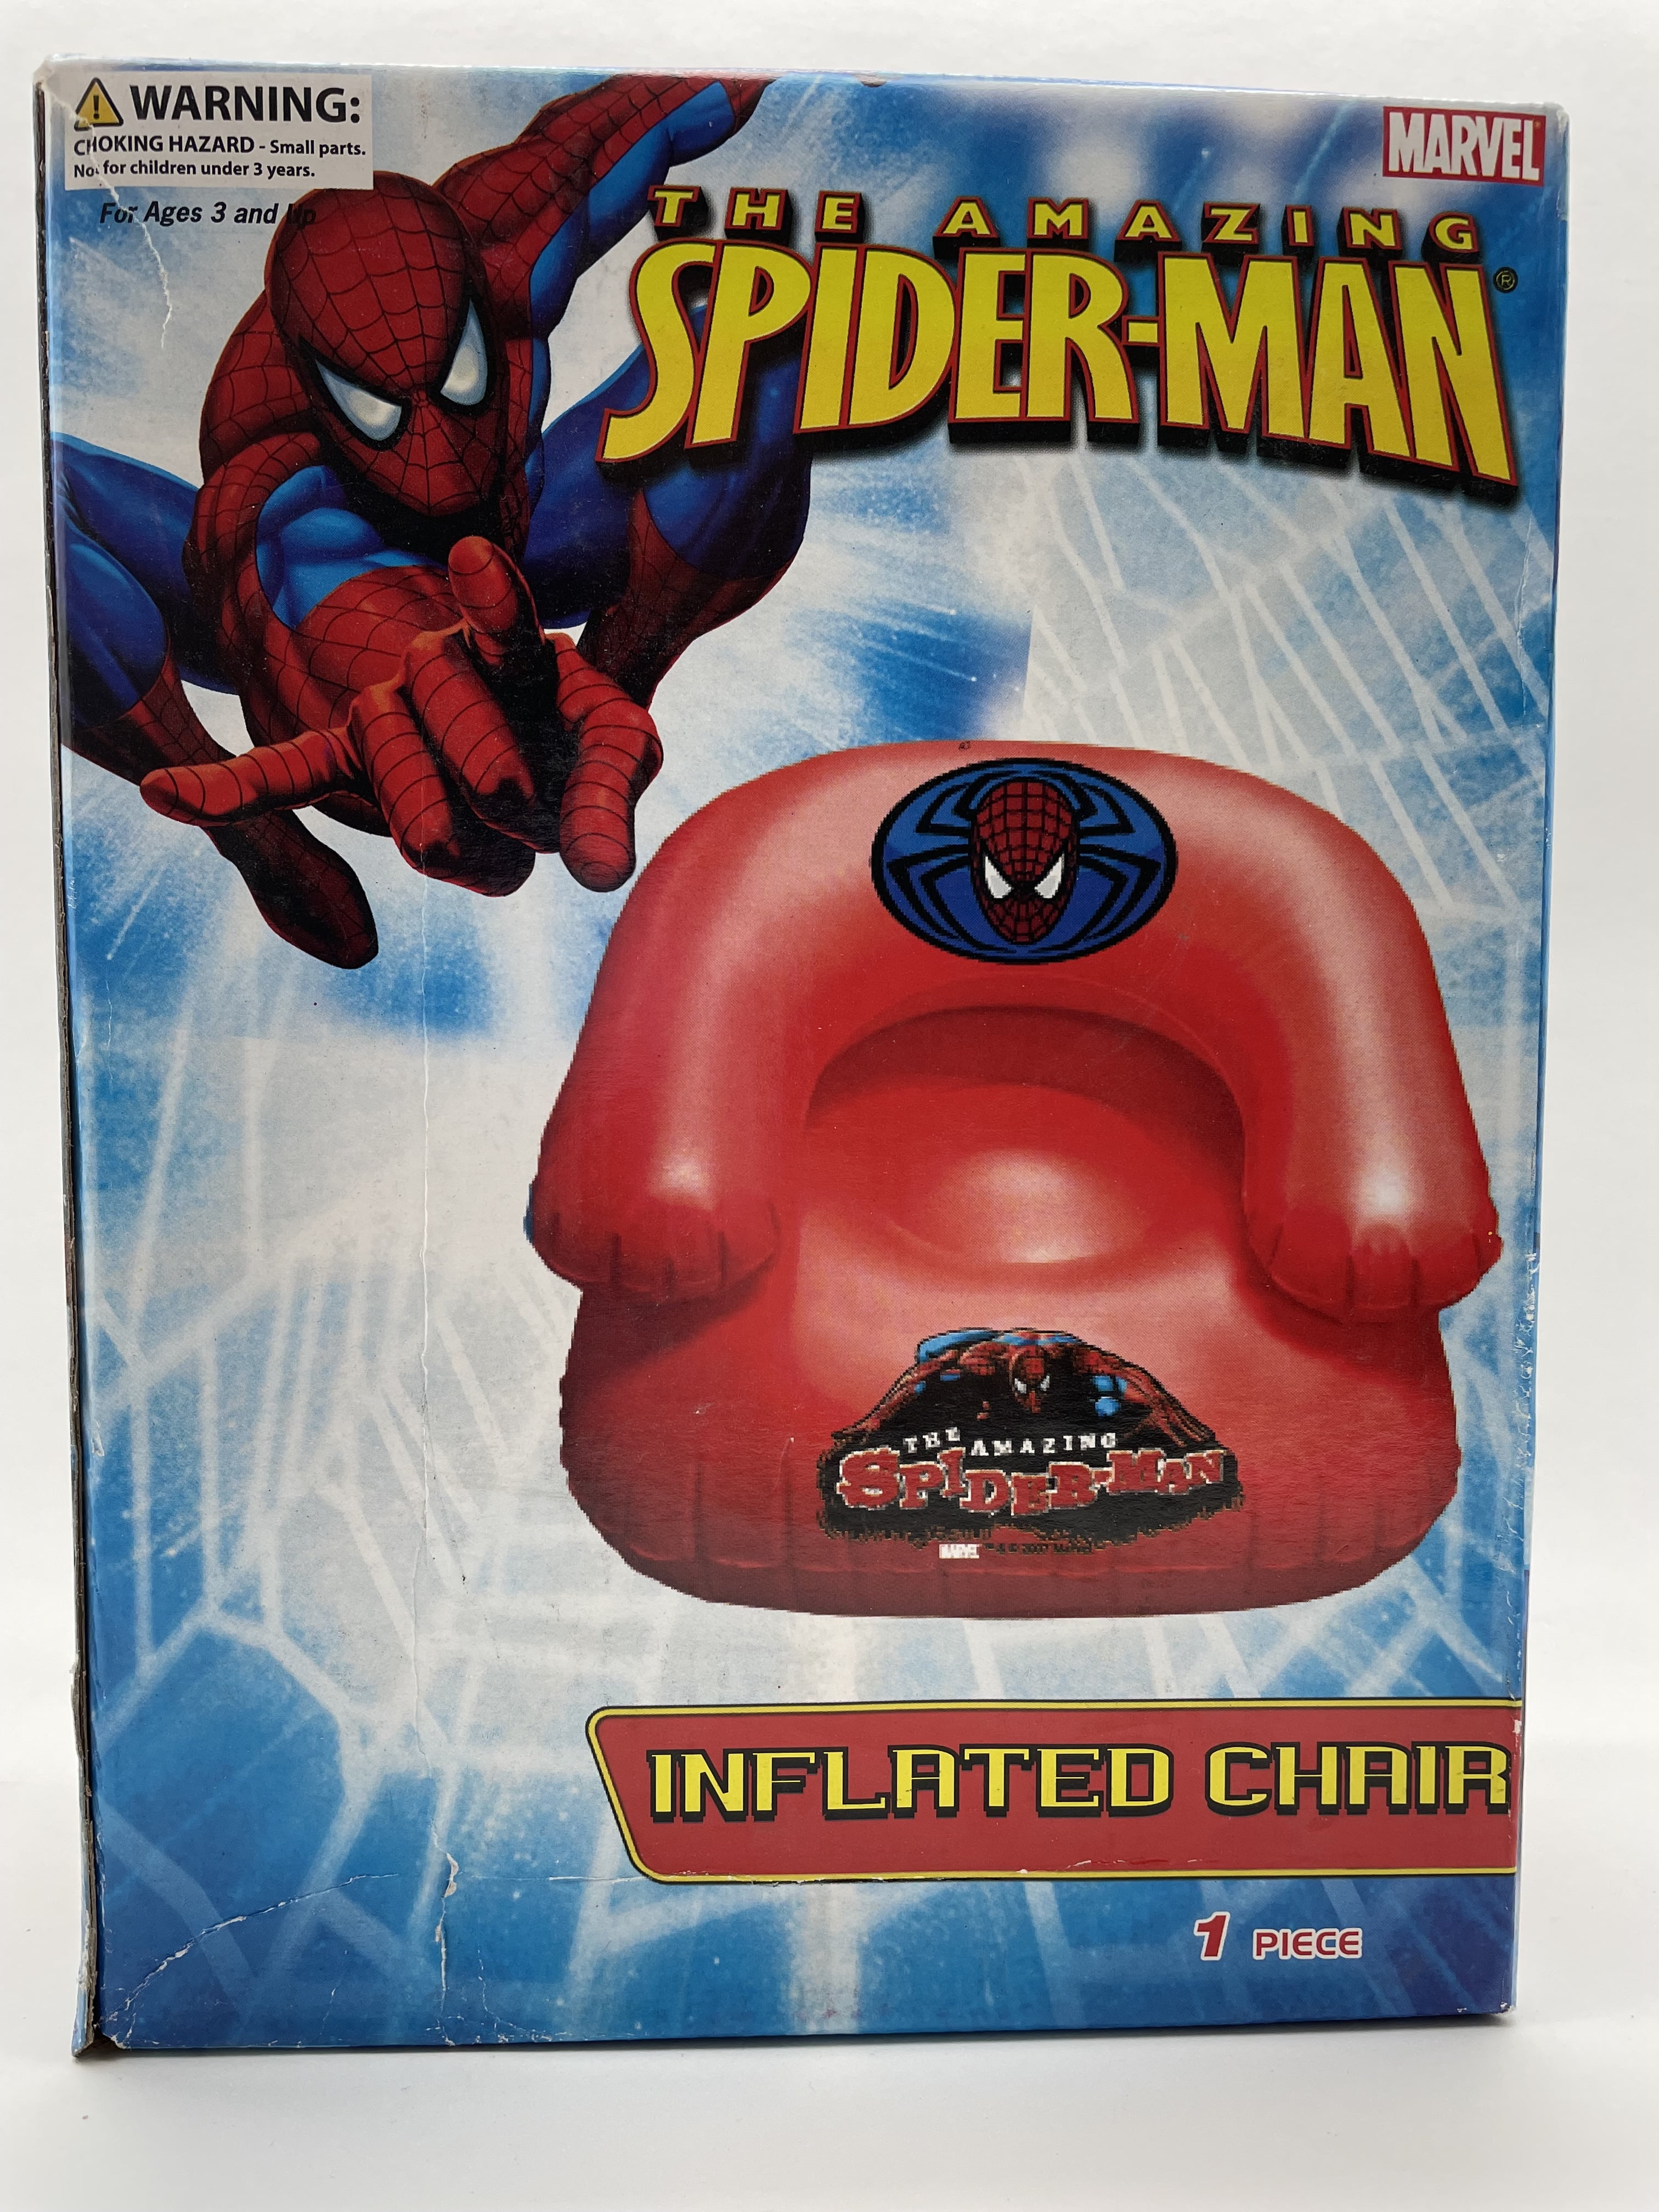 Details about   New Marvel Spider-Man Pool Float Swim Ring With Repair Kit 